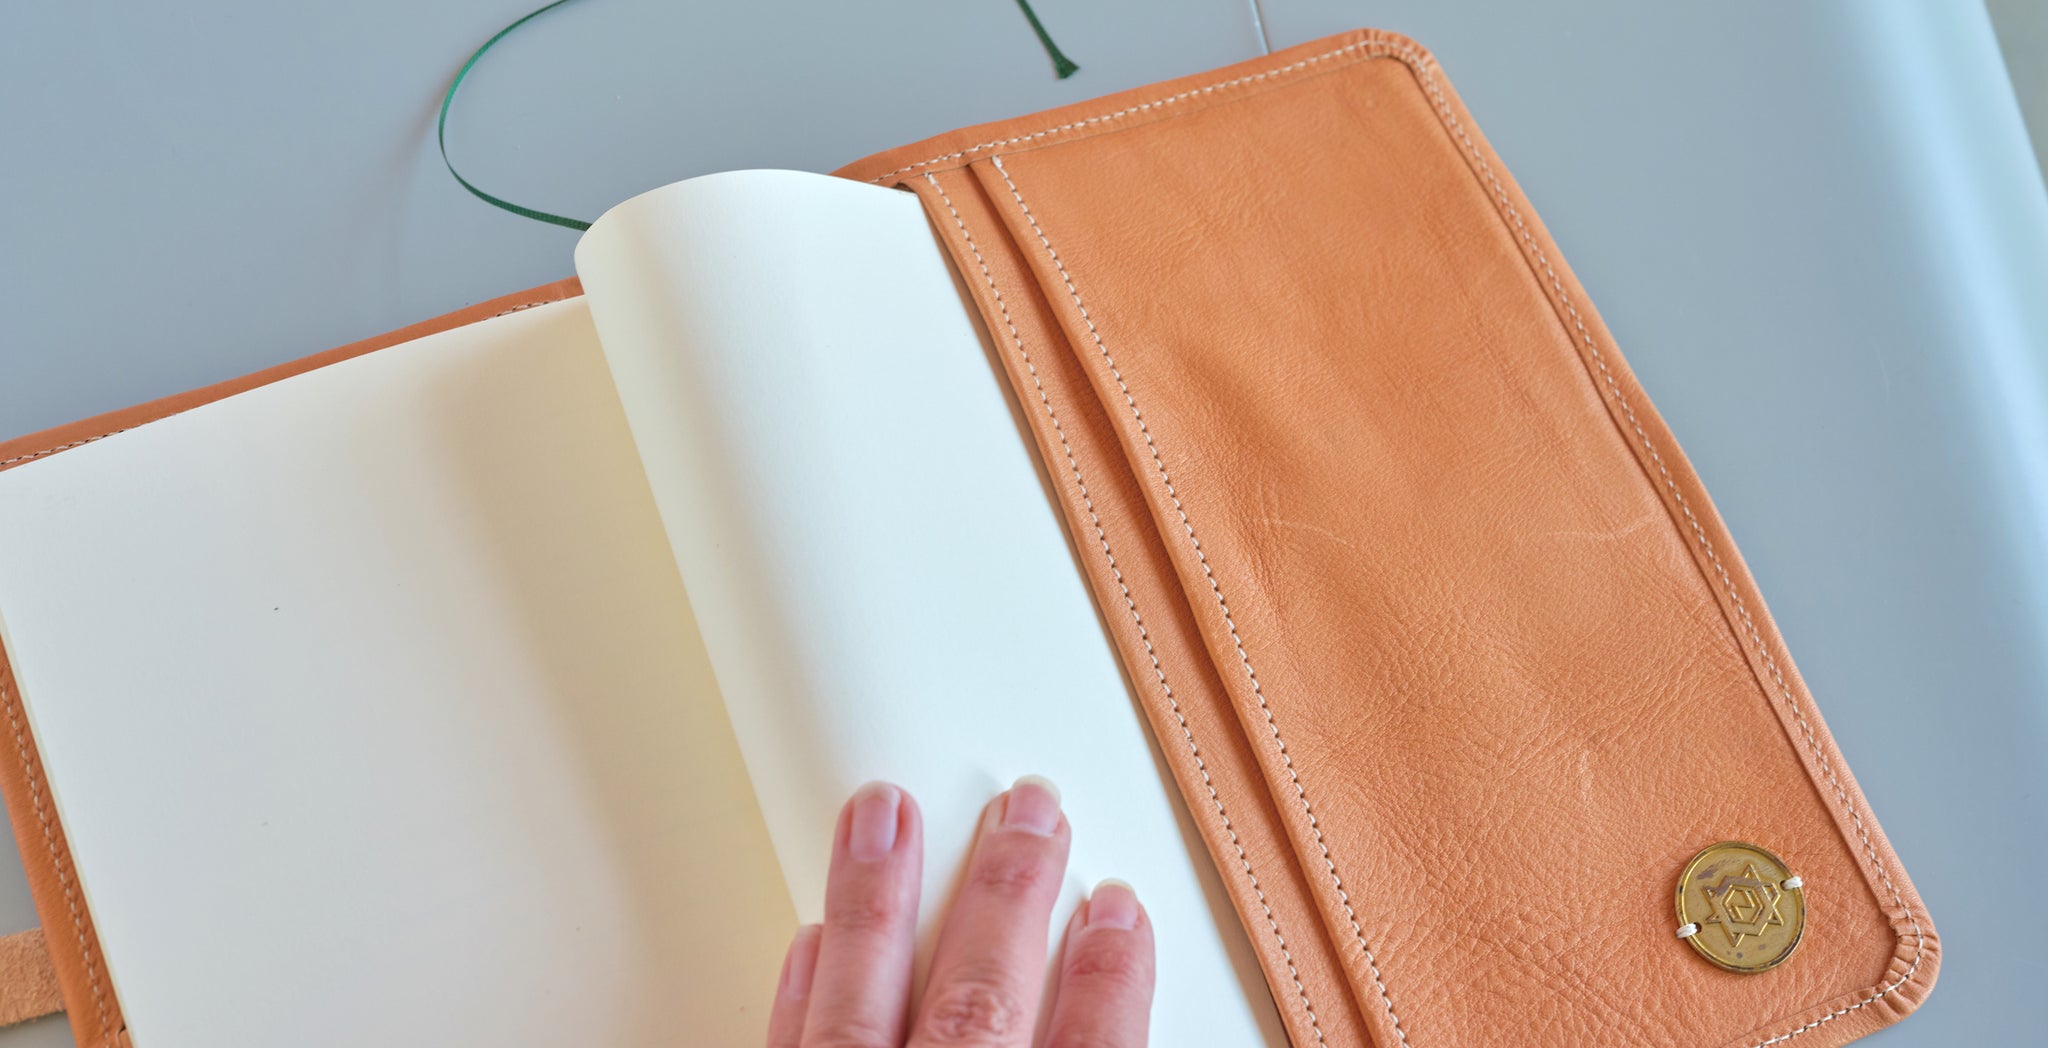 THE SUPERIOR LABOR X NOMADO STORE A5 LEATHER WRITER'S ORGANIZER